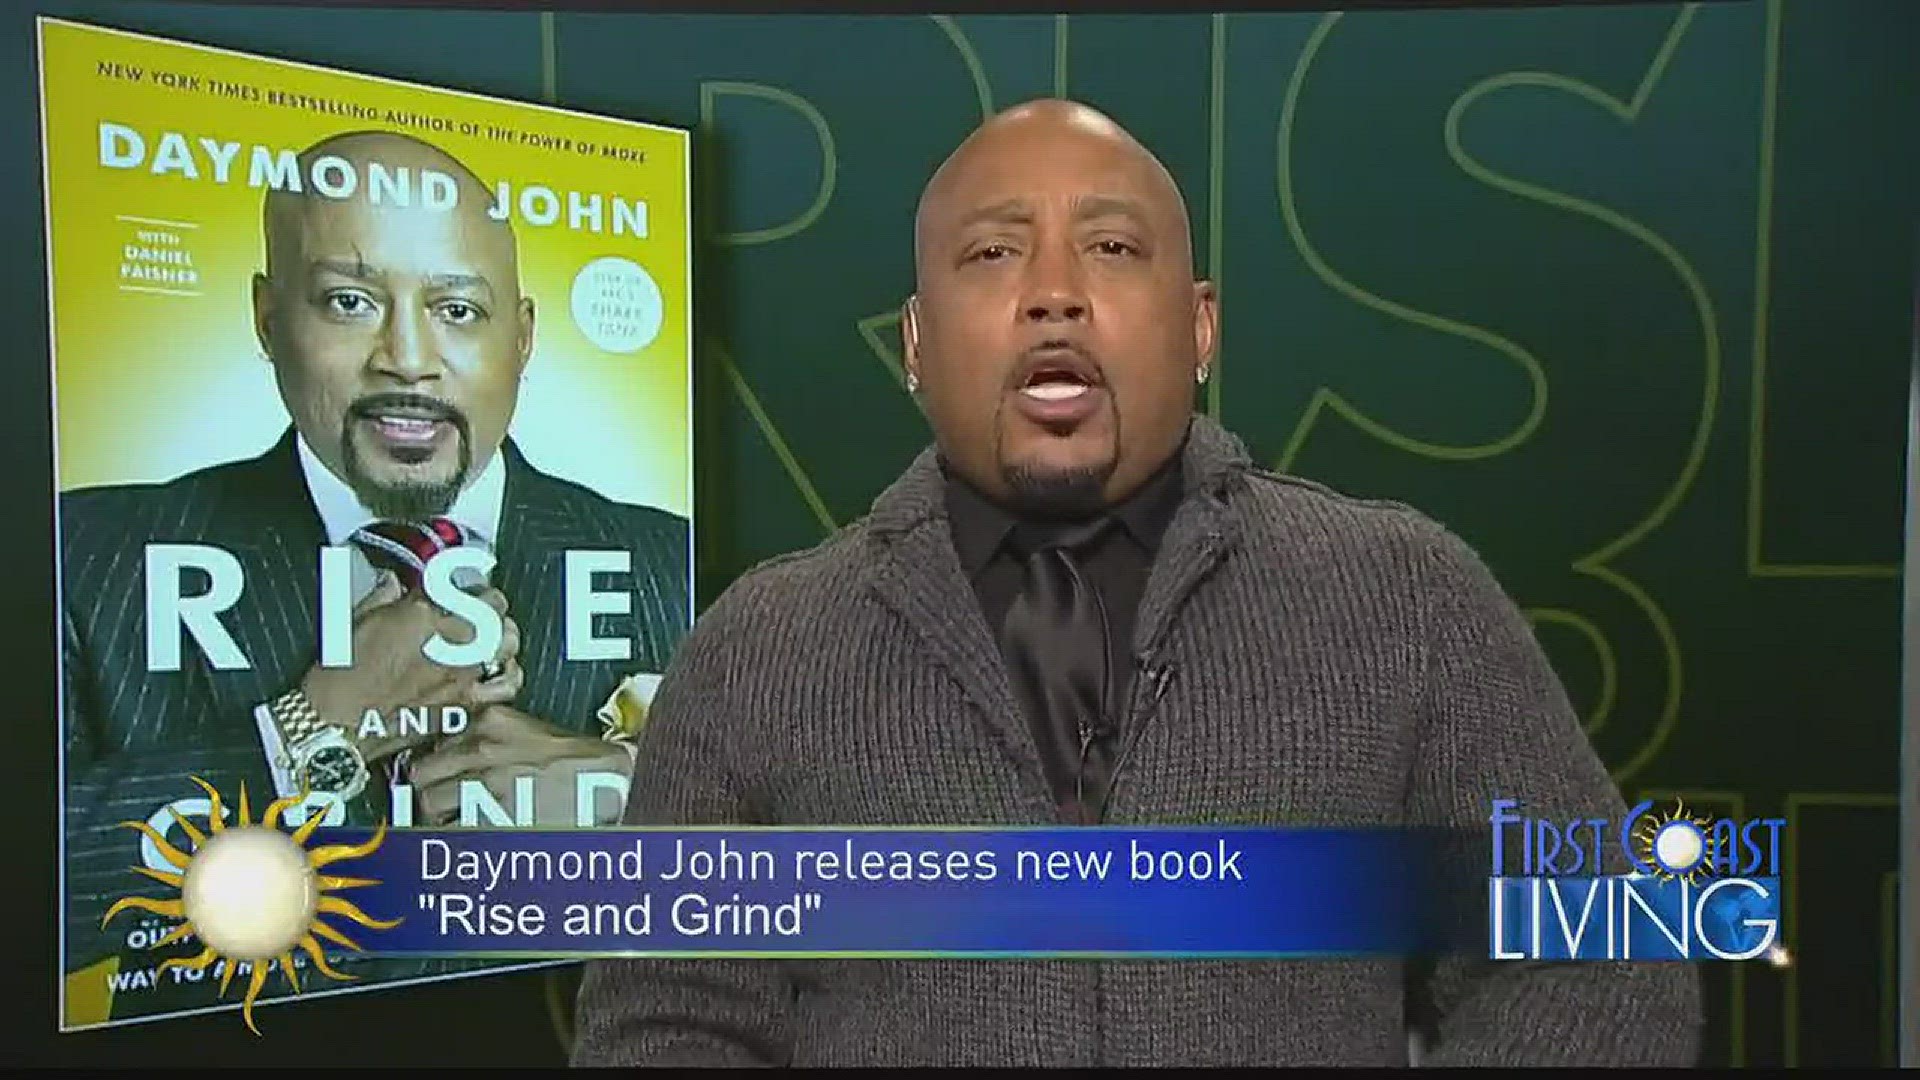 Daymond John's New Book "Rise and Grind"